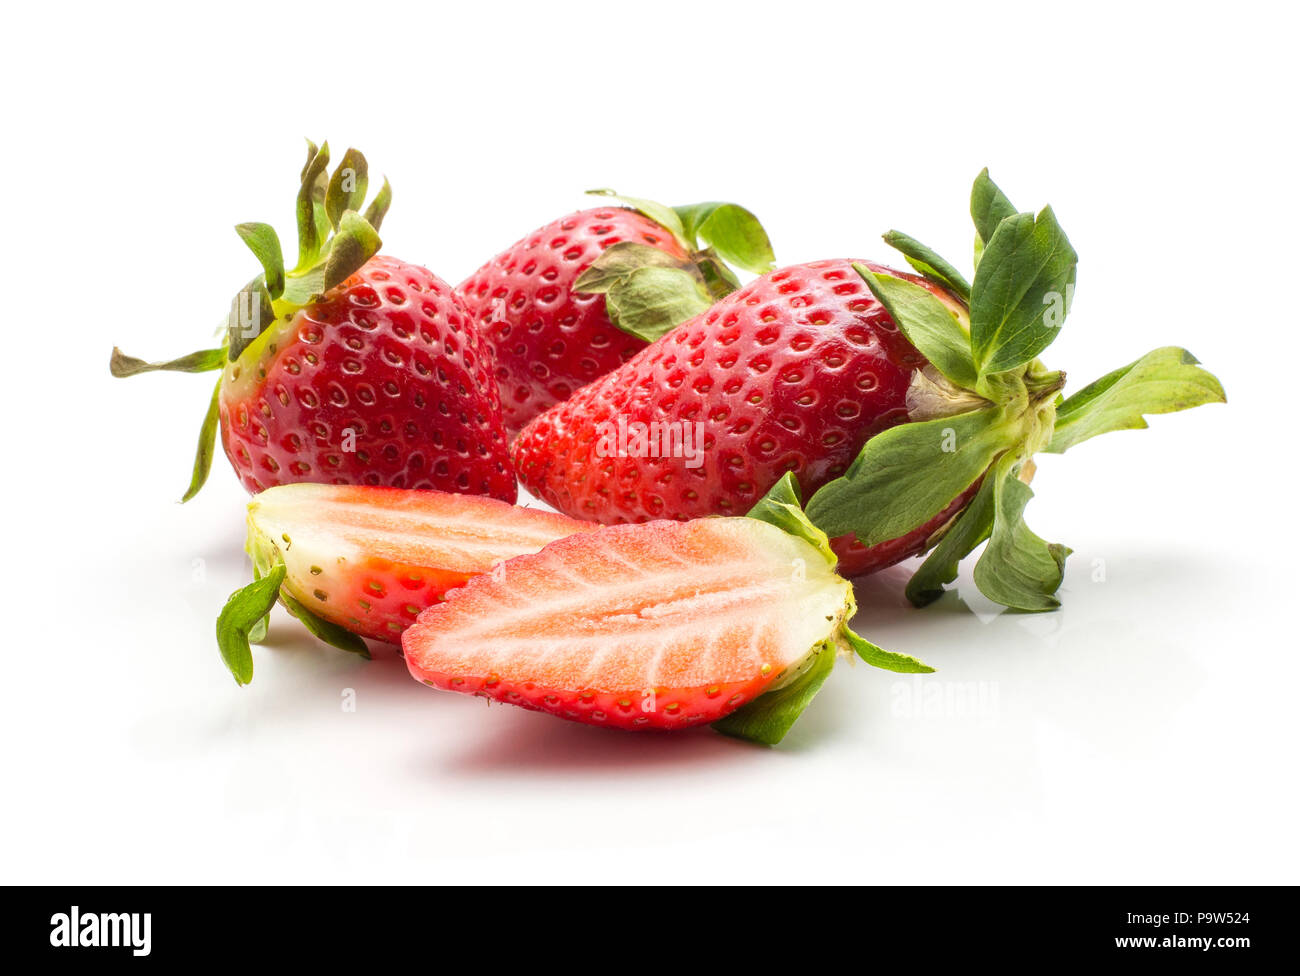 Three garden strawberrie and one sliced in two halves isolated on white background Stock Photo